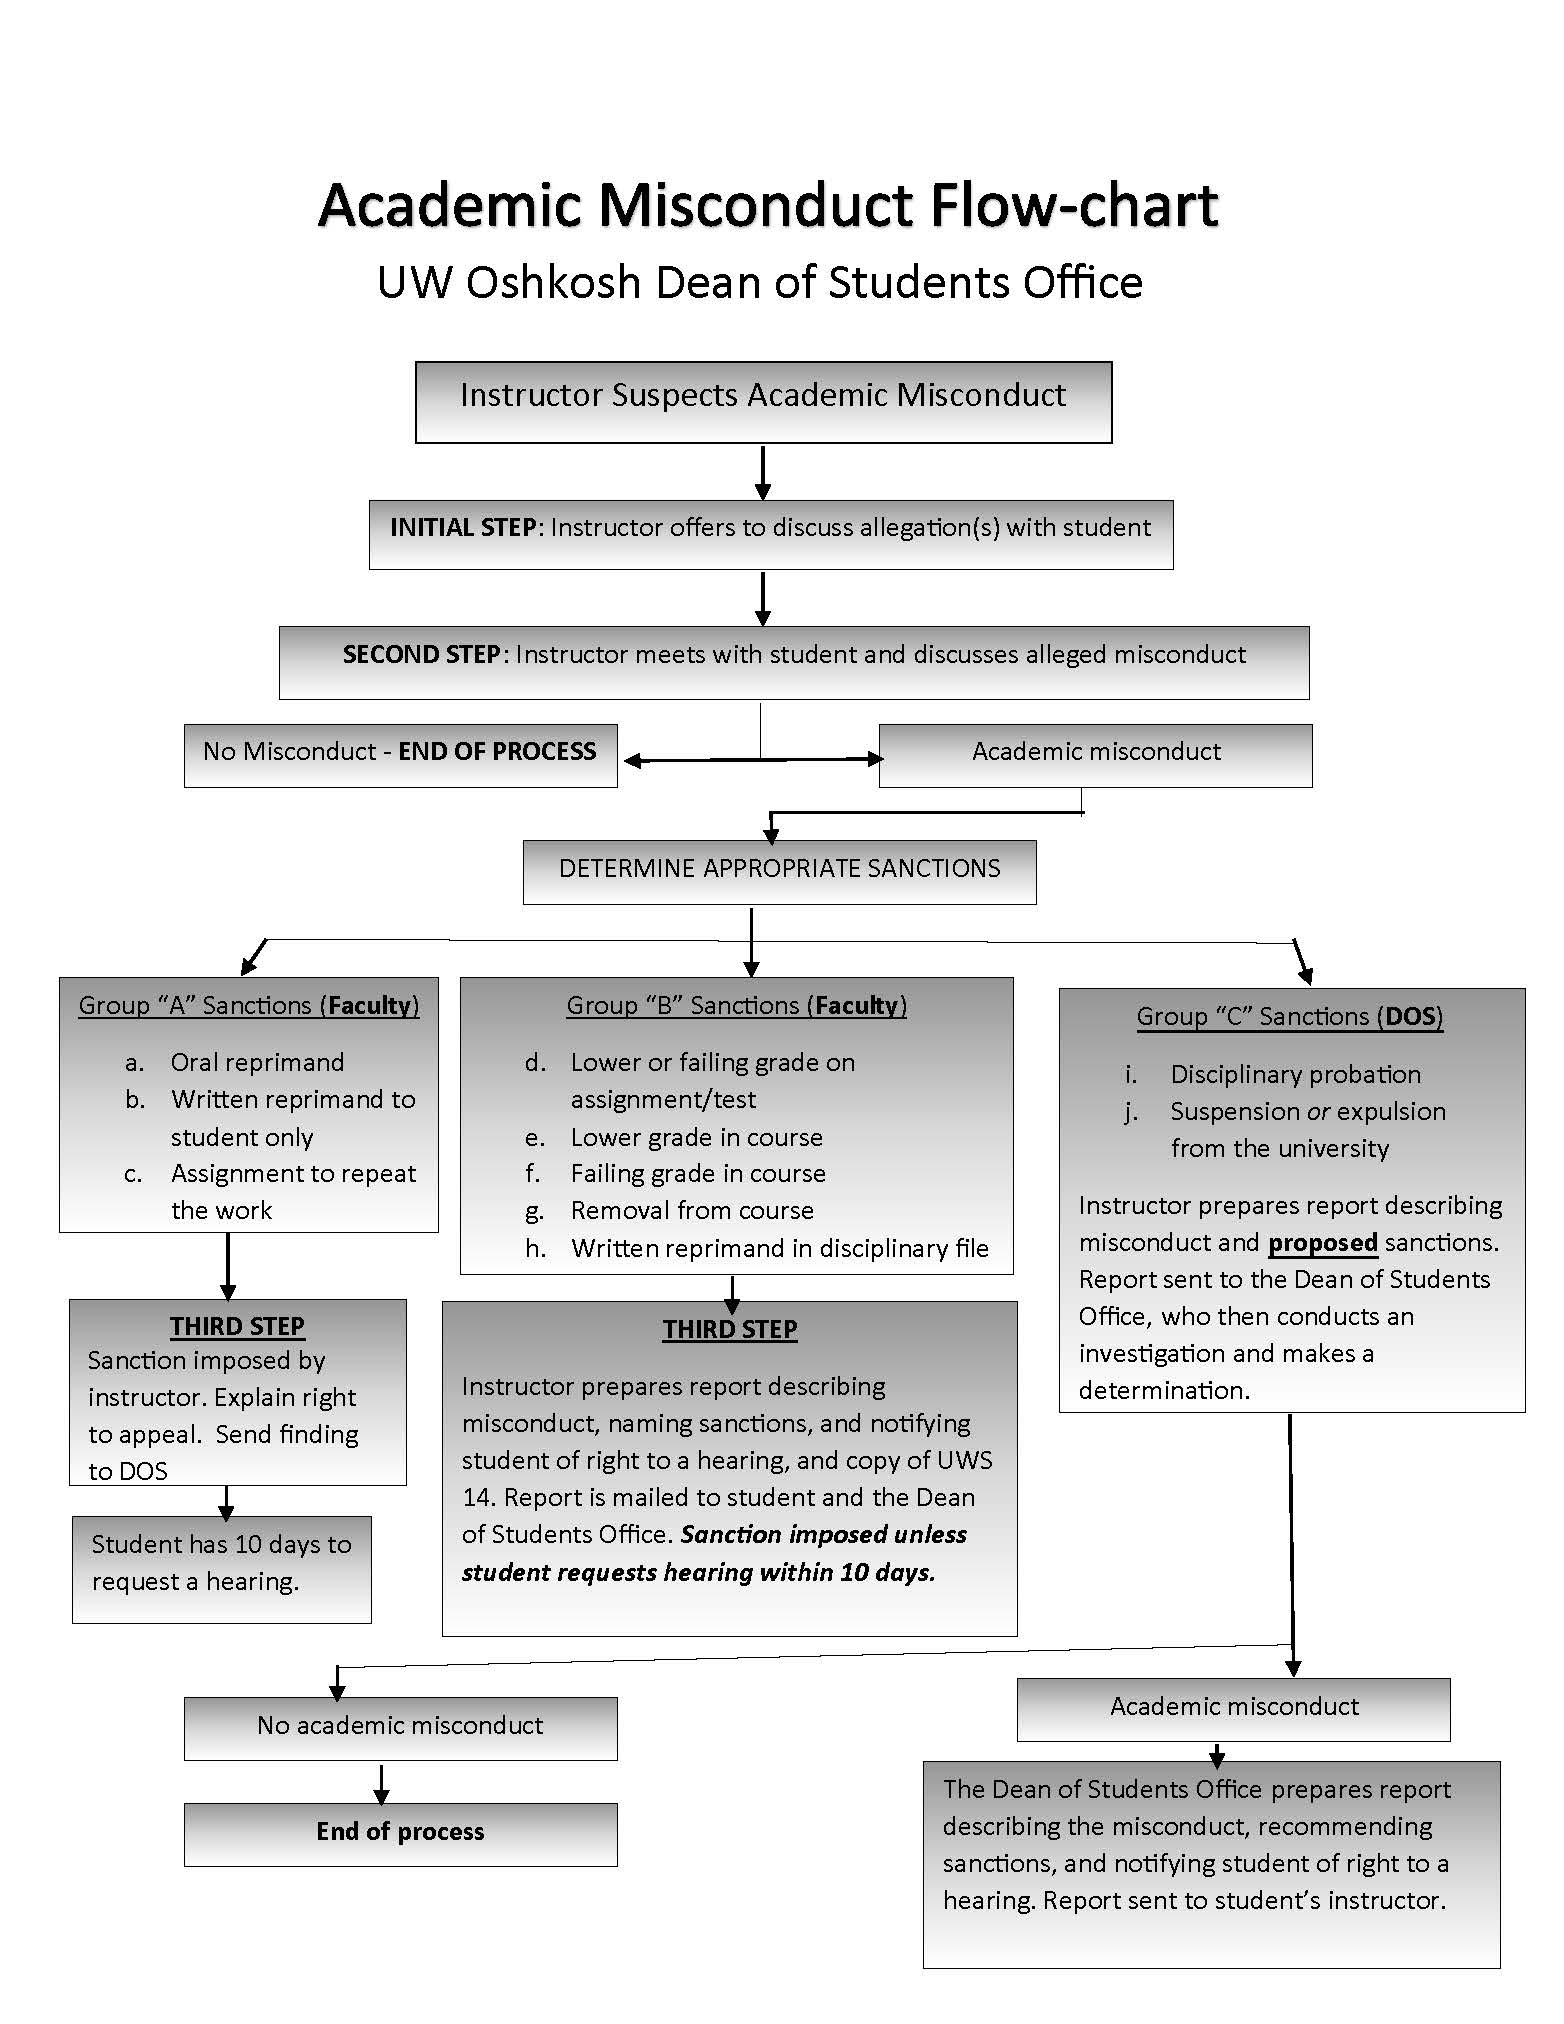 Academic Misconduct Flow Chart